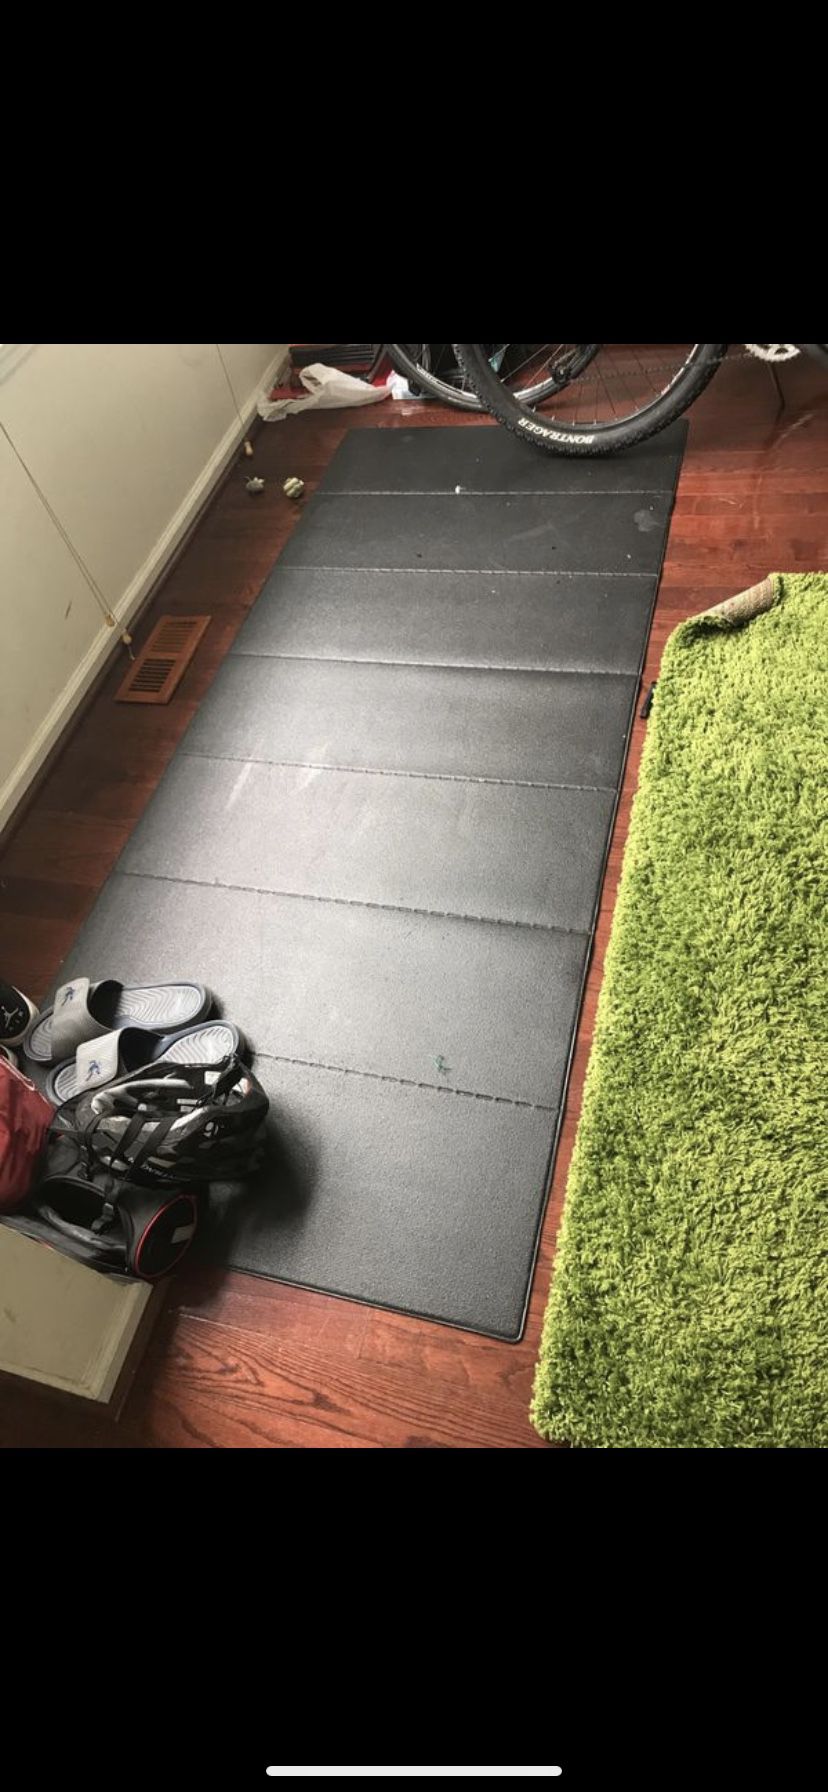 Exercise mat. Thick and folds up